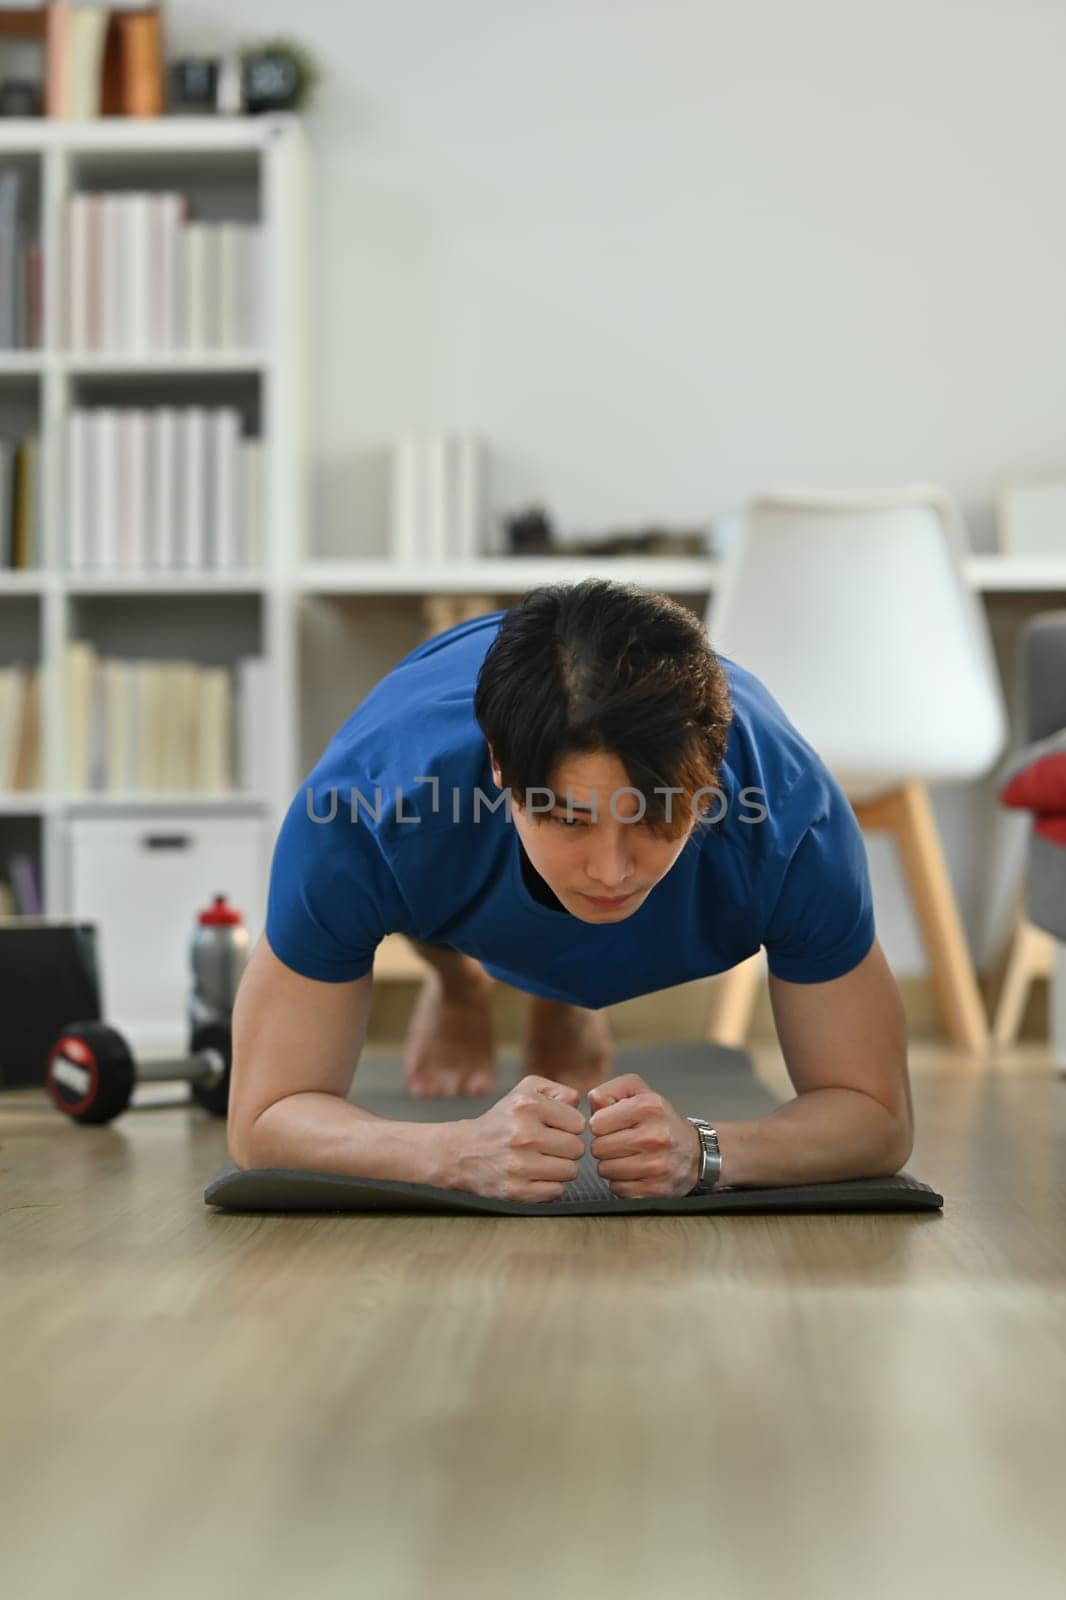 Sporty asian man wearing doing plank position while exercising in cozy home interior. Healthy lifestyle, sport and motivation concept.